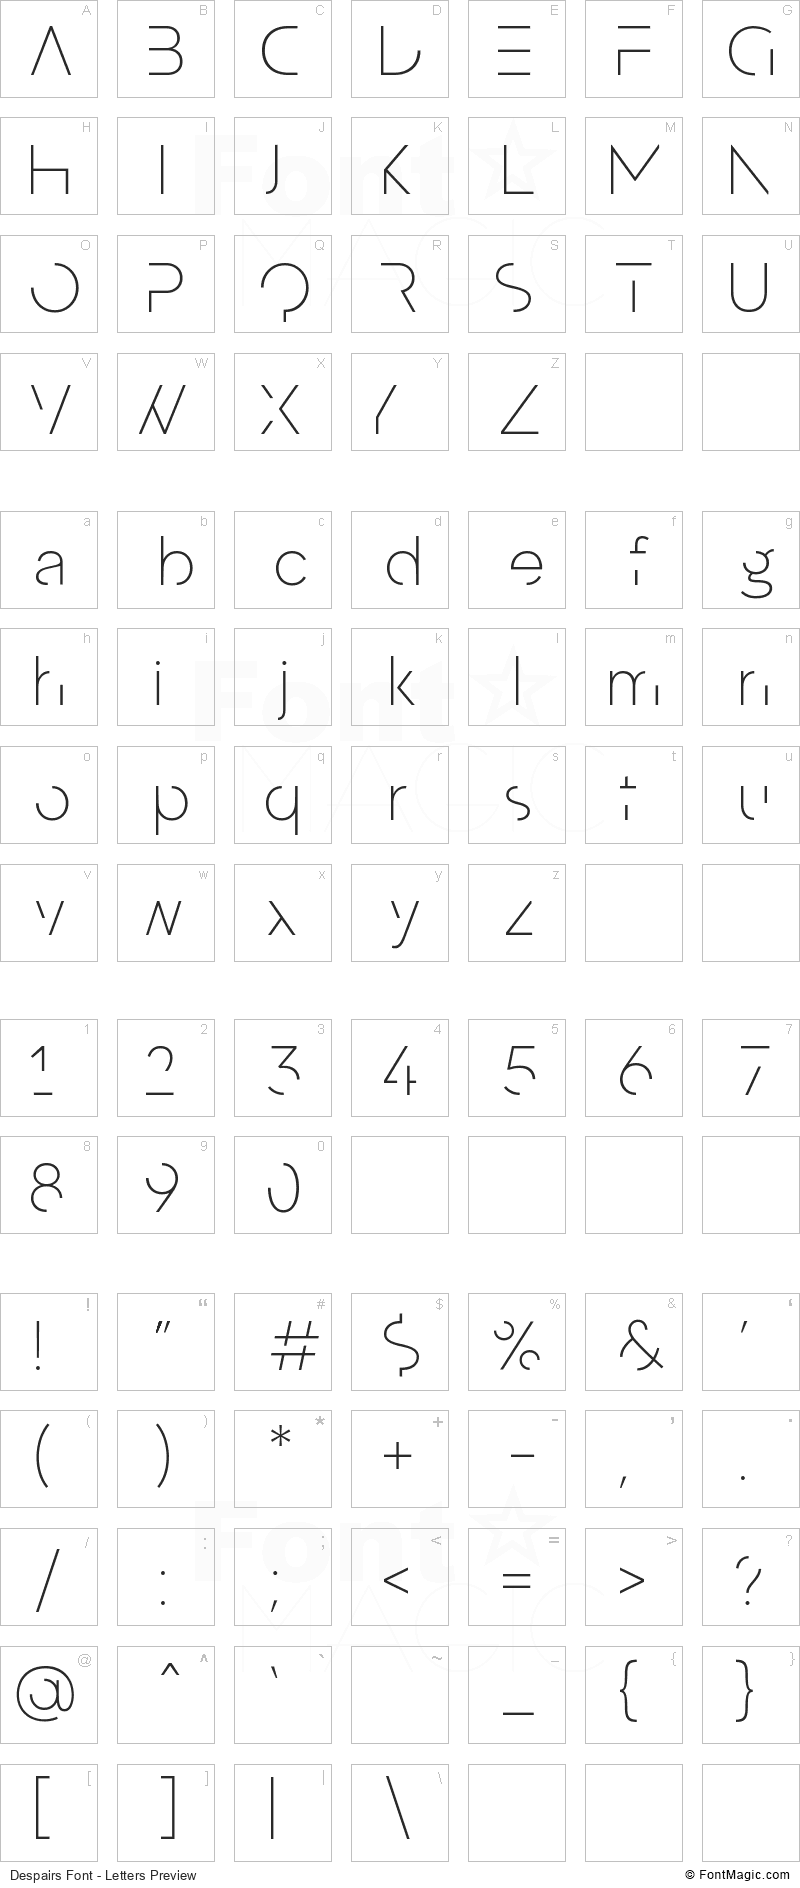 Despairs Font - All Latters Preview Chart